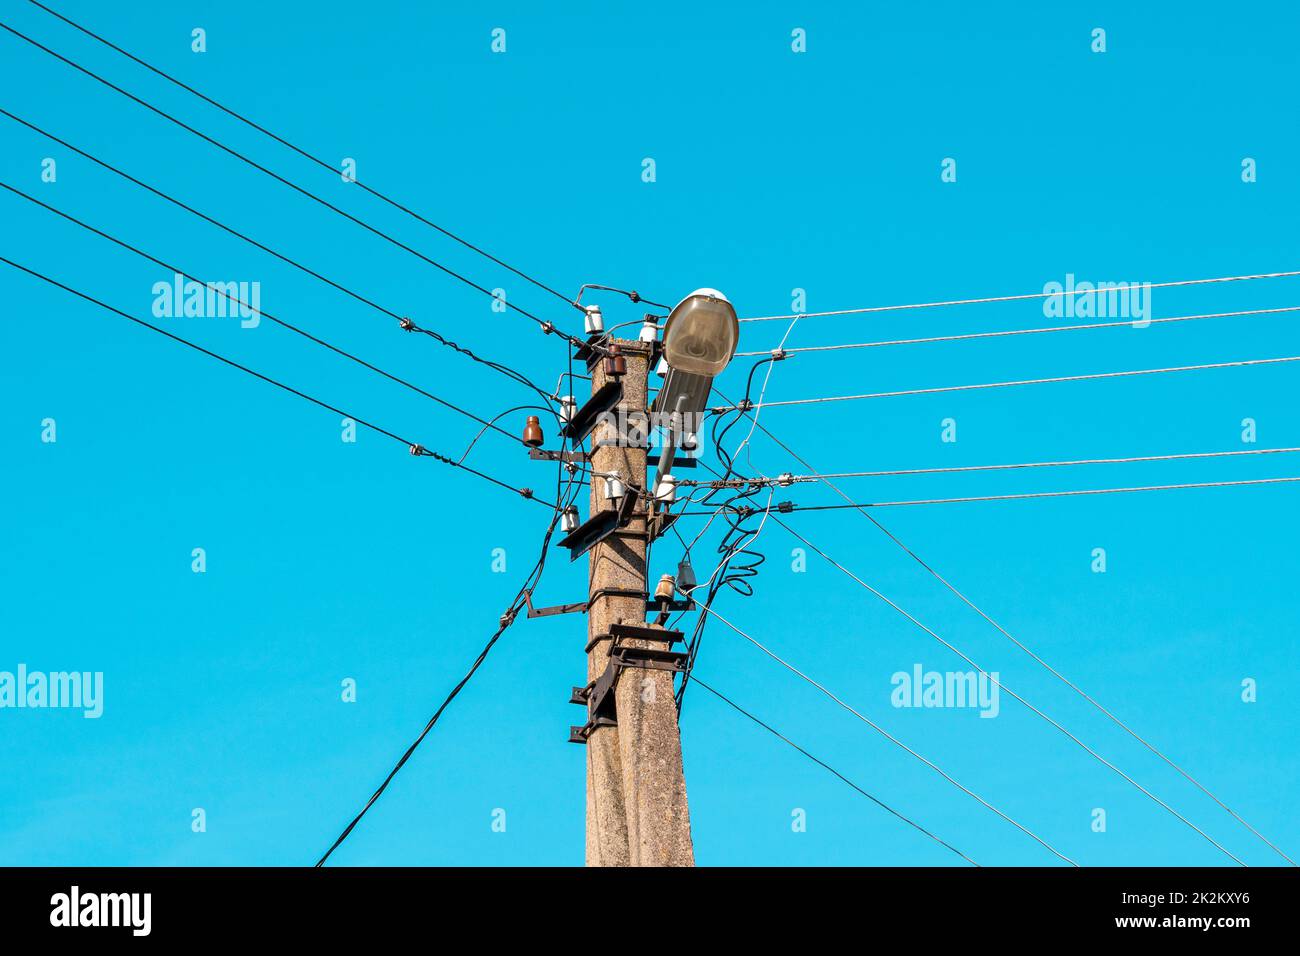 Electric wires hanging on a pole with a lighting lamp Stock Photo